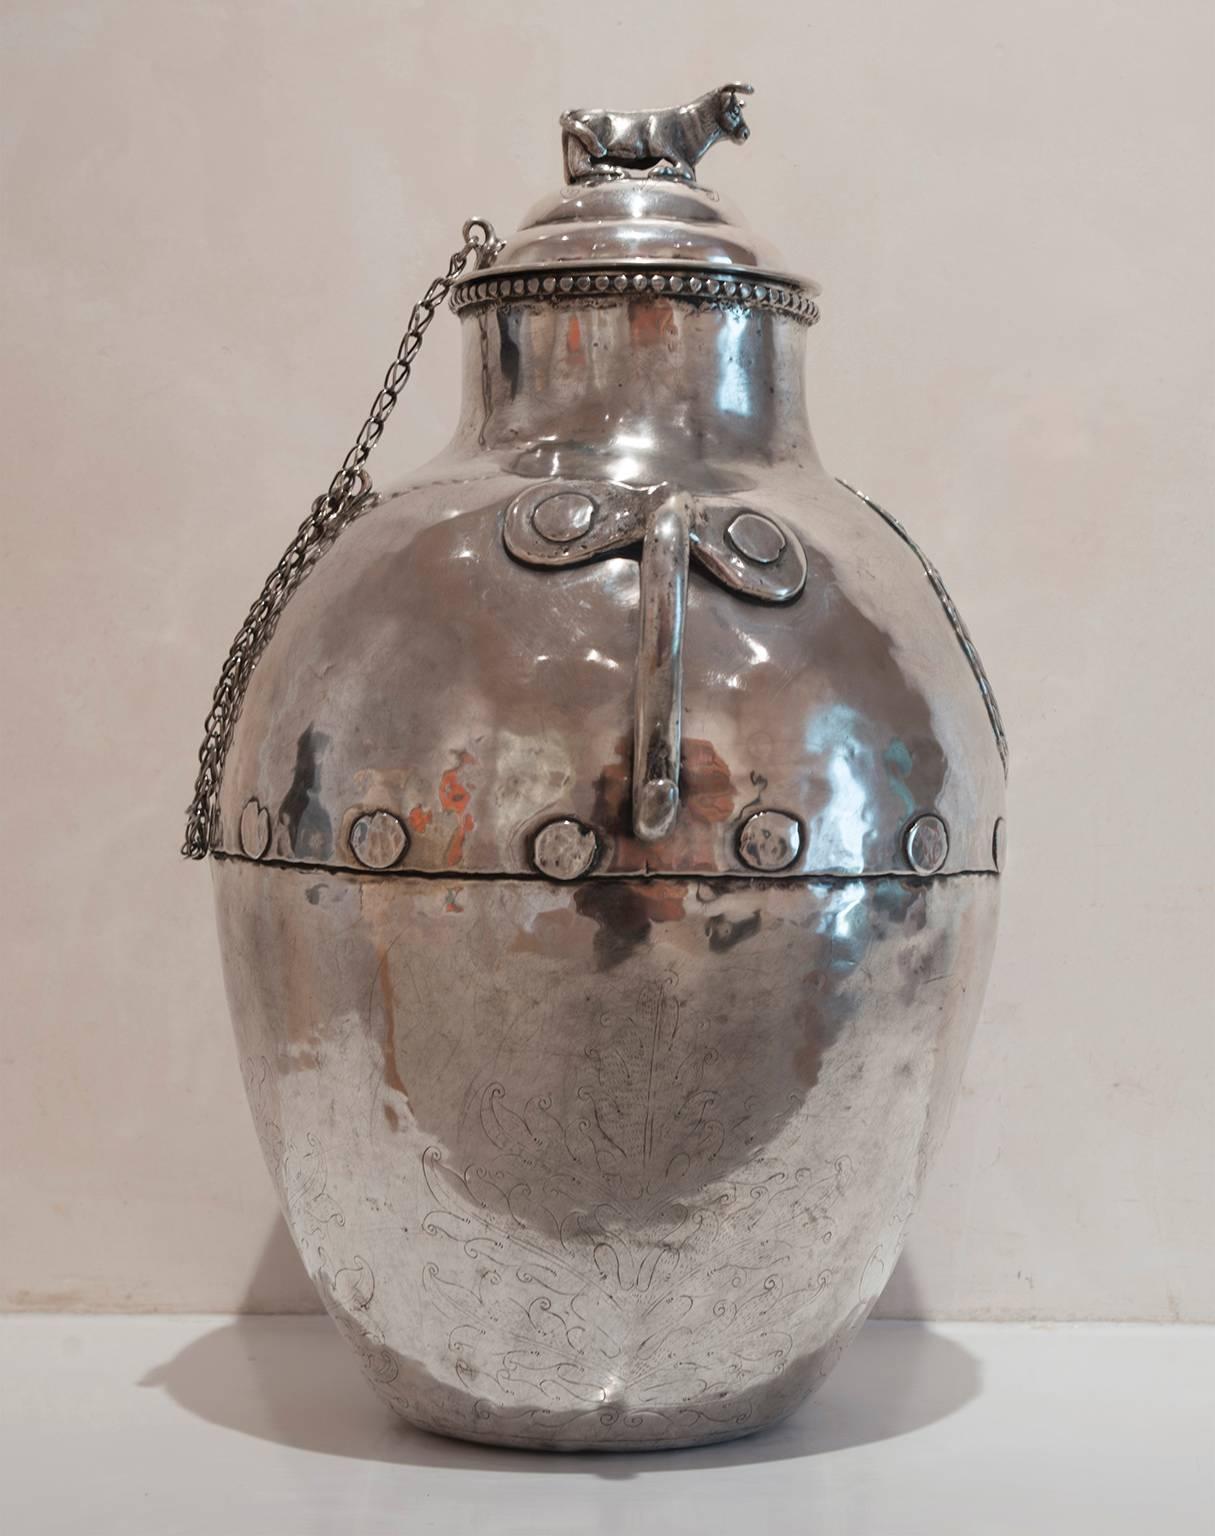 The domed cover with resting bull finial attaches to jug with chain, the jug with large raised coat of arms to front and engraved decoration to lower portion, applied handles. Approximately 188 troy oz.